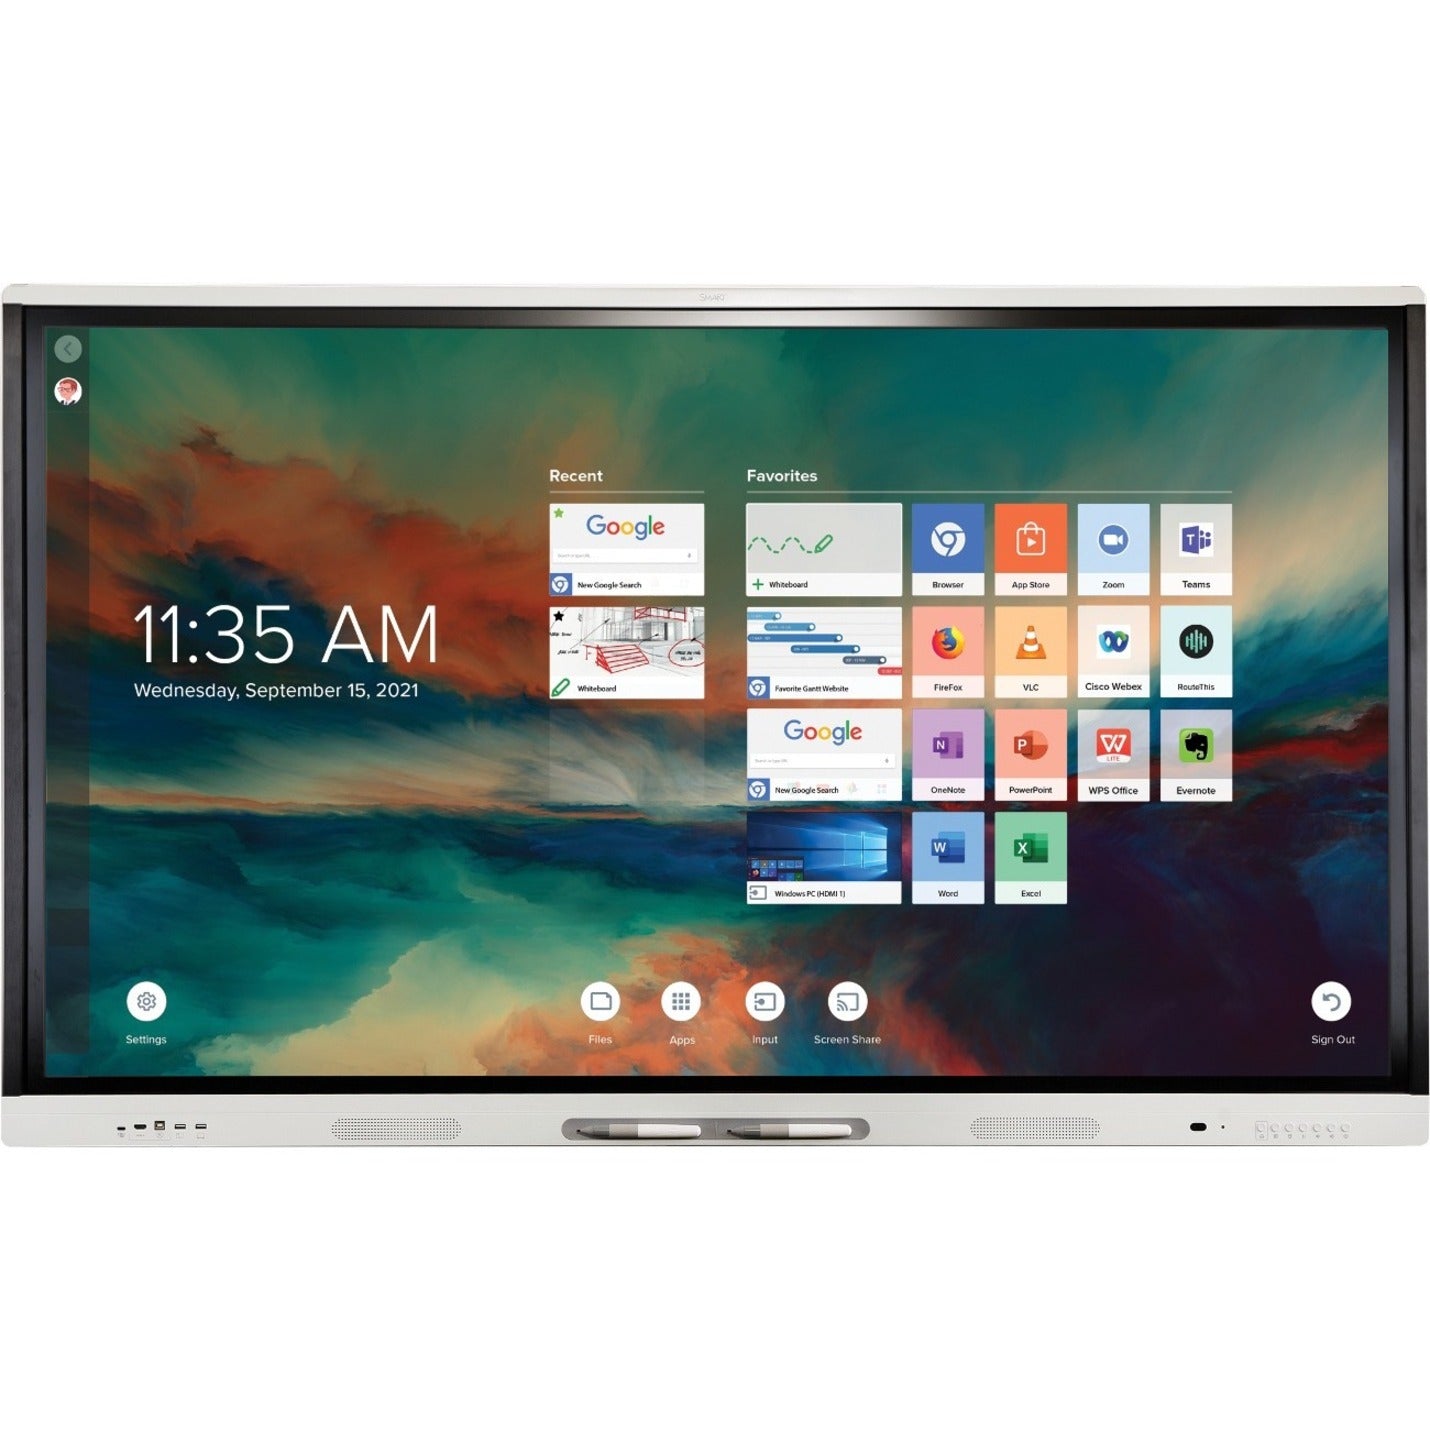 SMART MX (V3) Pro 75" LCD Touchscreen Monitor - 4K UHD - Wall Mountable [Discontinued]